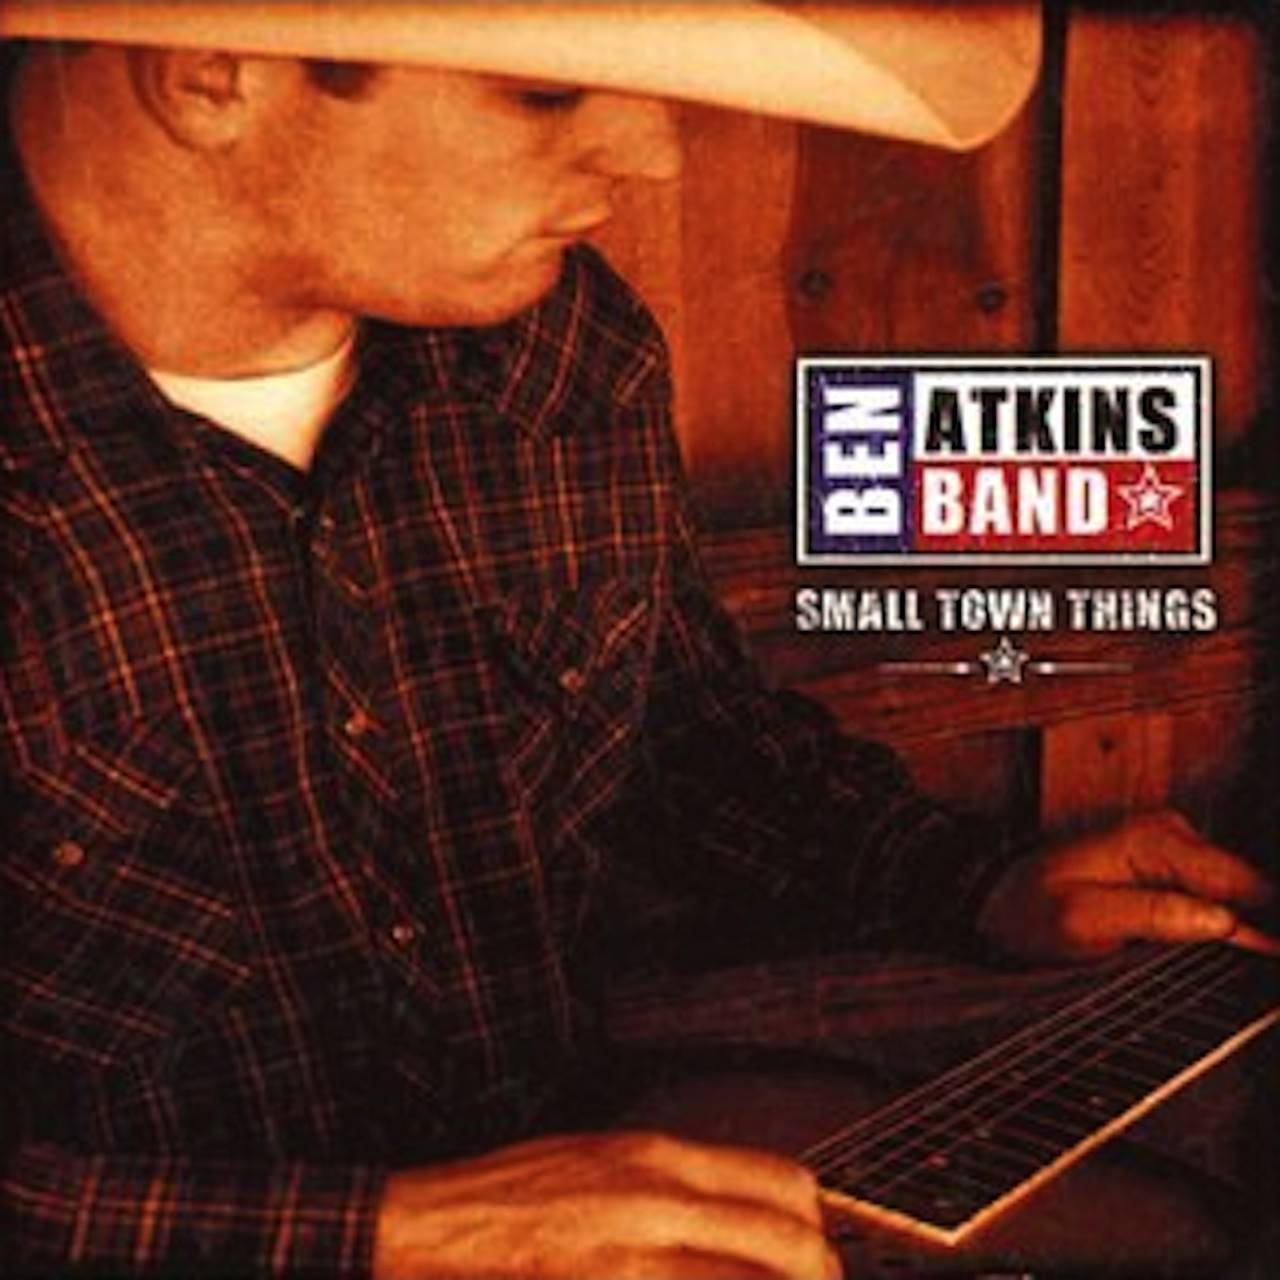 Ben Atkins Band - Small Town Things cover album